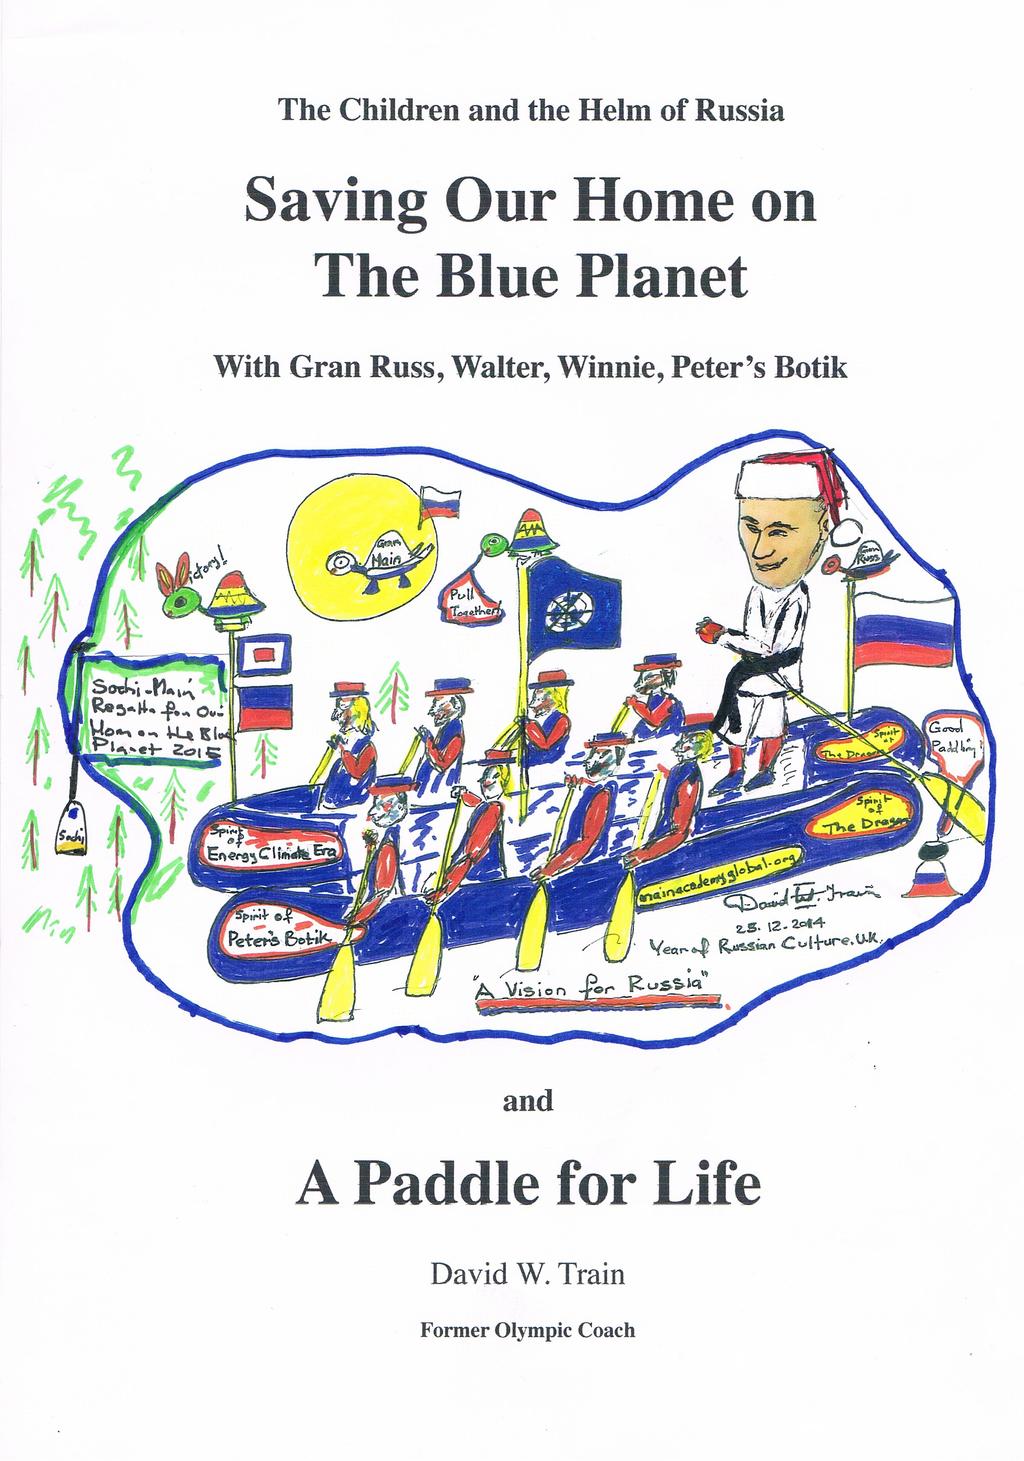 14 The Paddle for Life Perpetual Prizes signed by world leaders. In any system, whether it be a club, school or country, it is essential to get whoever is at the top of the system on board.